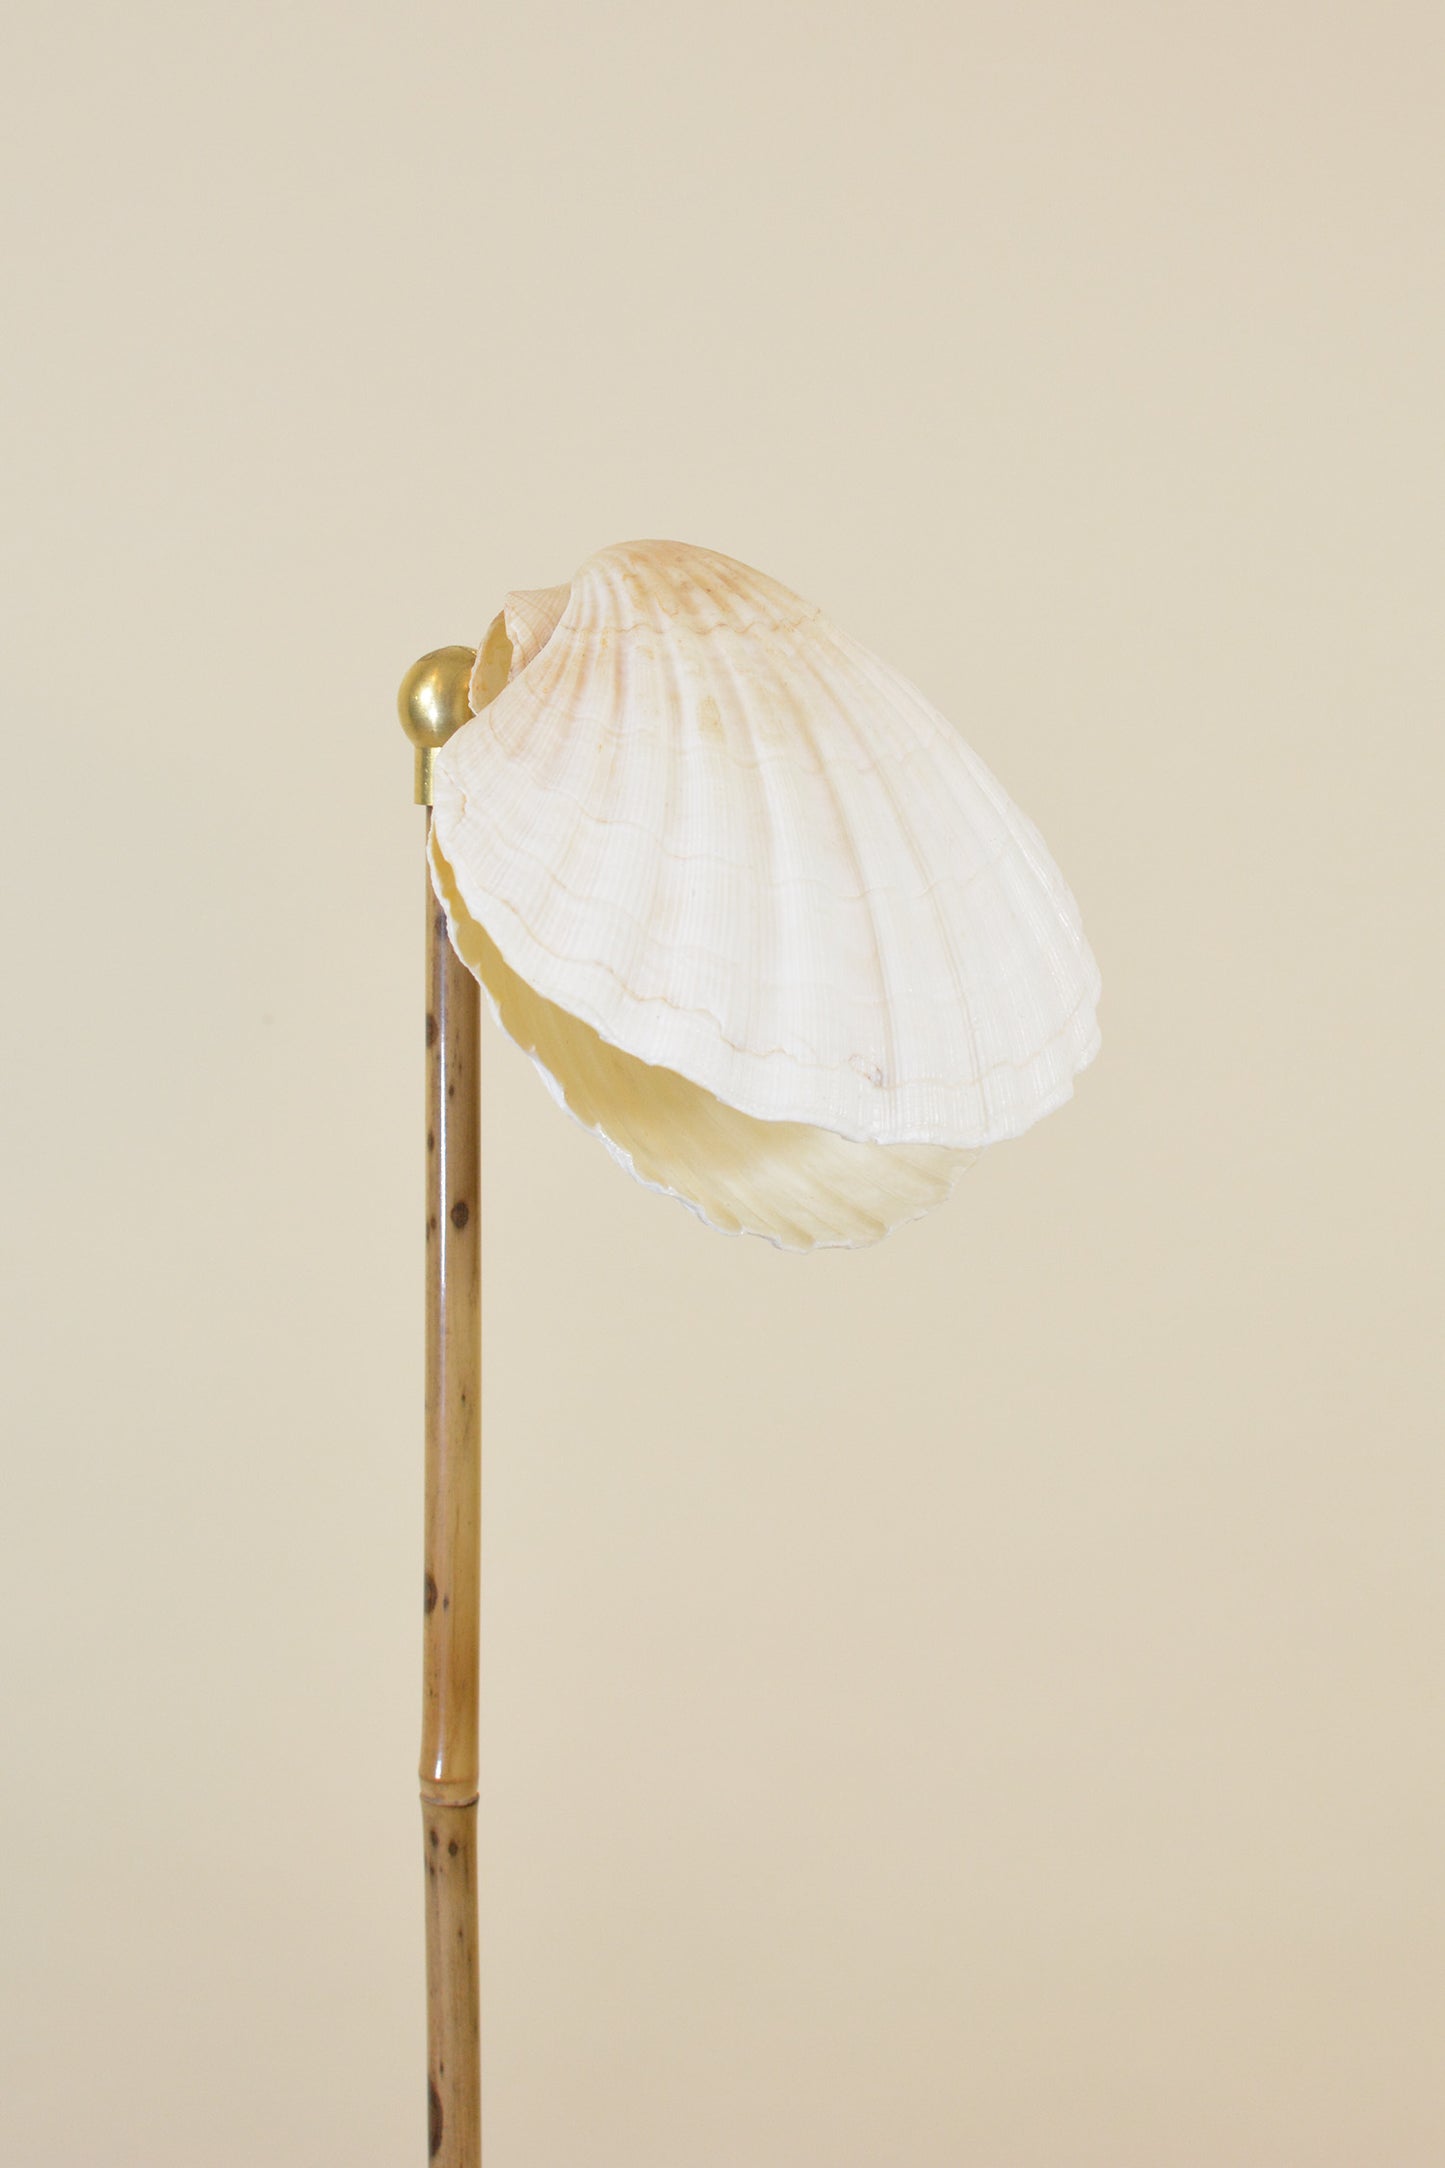 Sanremo Bamboo Reading Lamp in Coiled Black Leather and Marble with Natural Scallop Shell Shade — Model No. 027